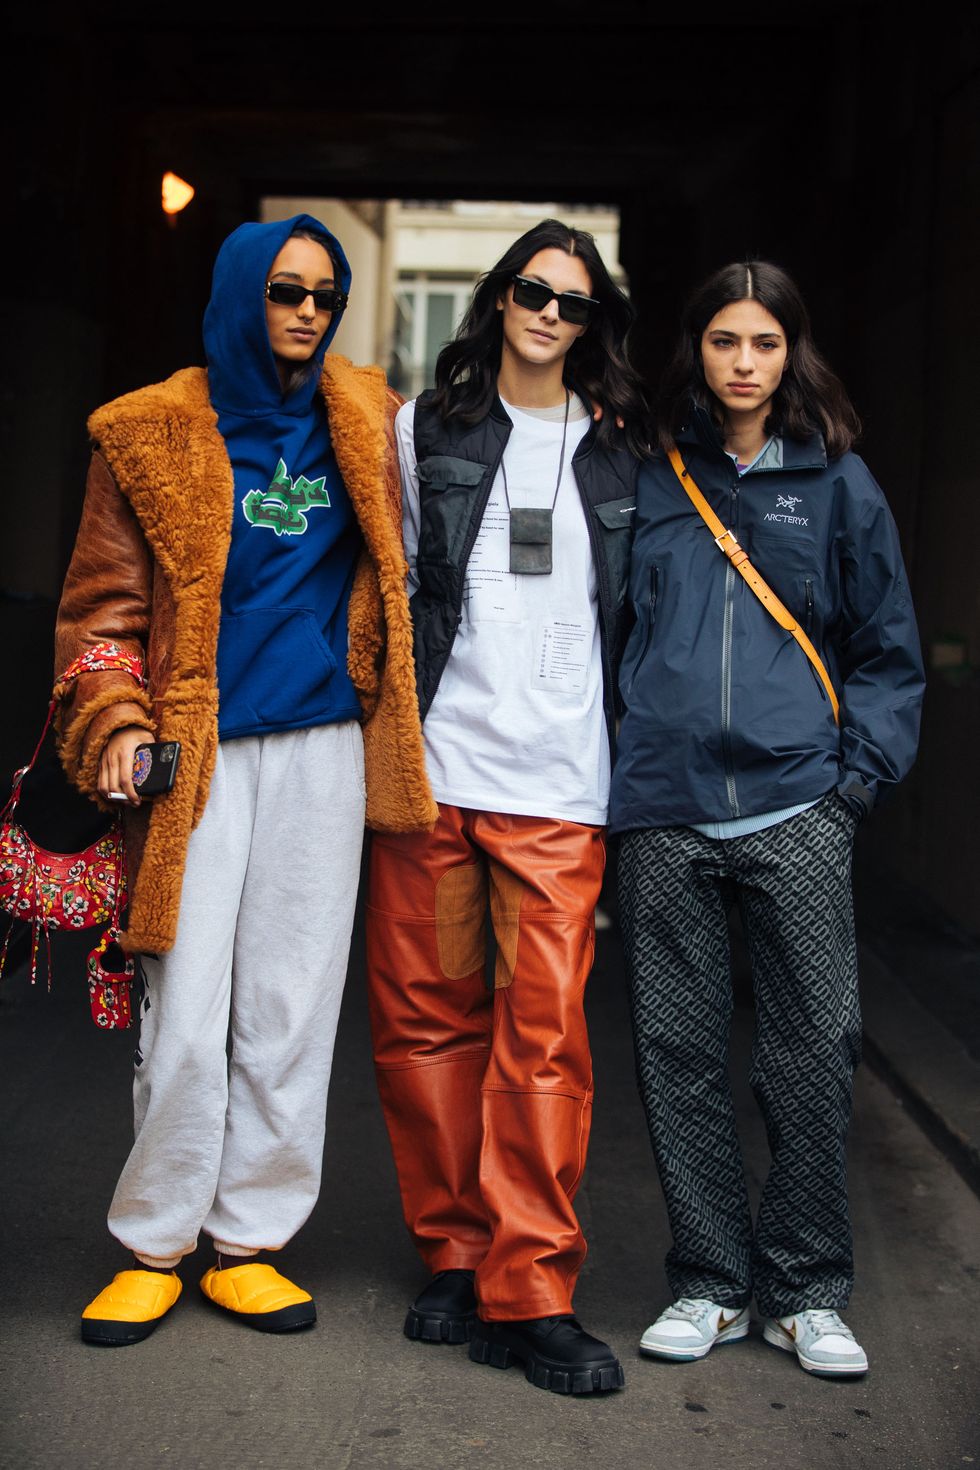 paris, france march 02 models mona tougaard, vittoria ceretti, and loli bahia after the courrèges show at garage amelot during paris fashion week fallwinter 2022 on march 02, 2022 in paris, france mona wears an oversized brown shaggy shearling jacket, blue hoodie, white trousers, red floral balenciaga print purse, yellow north face down slippers vittoria wears a black vest, small black neck pouch, white mm6 maison margiela shirt, brown leather pants, and black chunky boots loli wears a blue arcteryx jacket, black chain print pants, and gray and white nike dunk sneakers photo by melodie jenggetty images